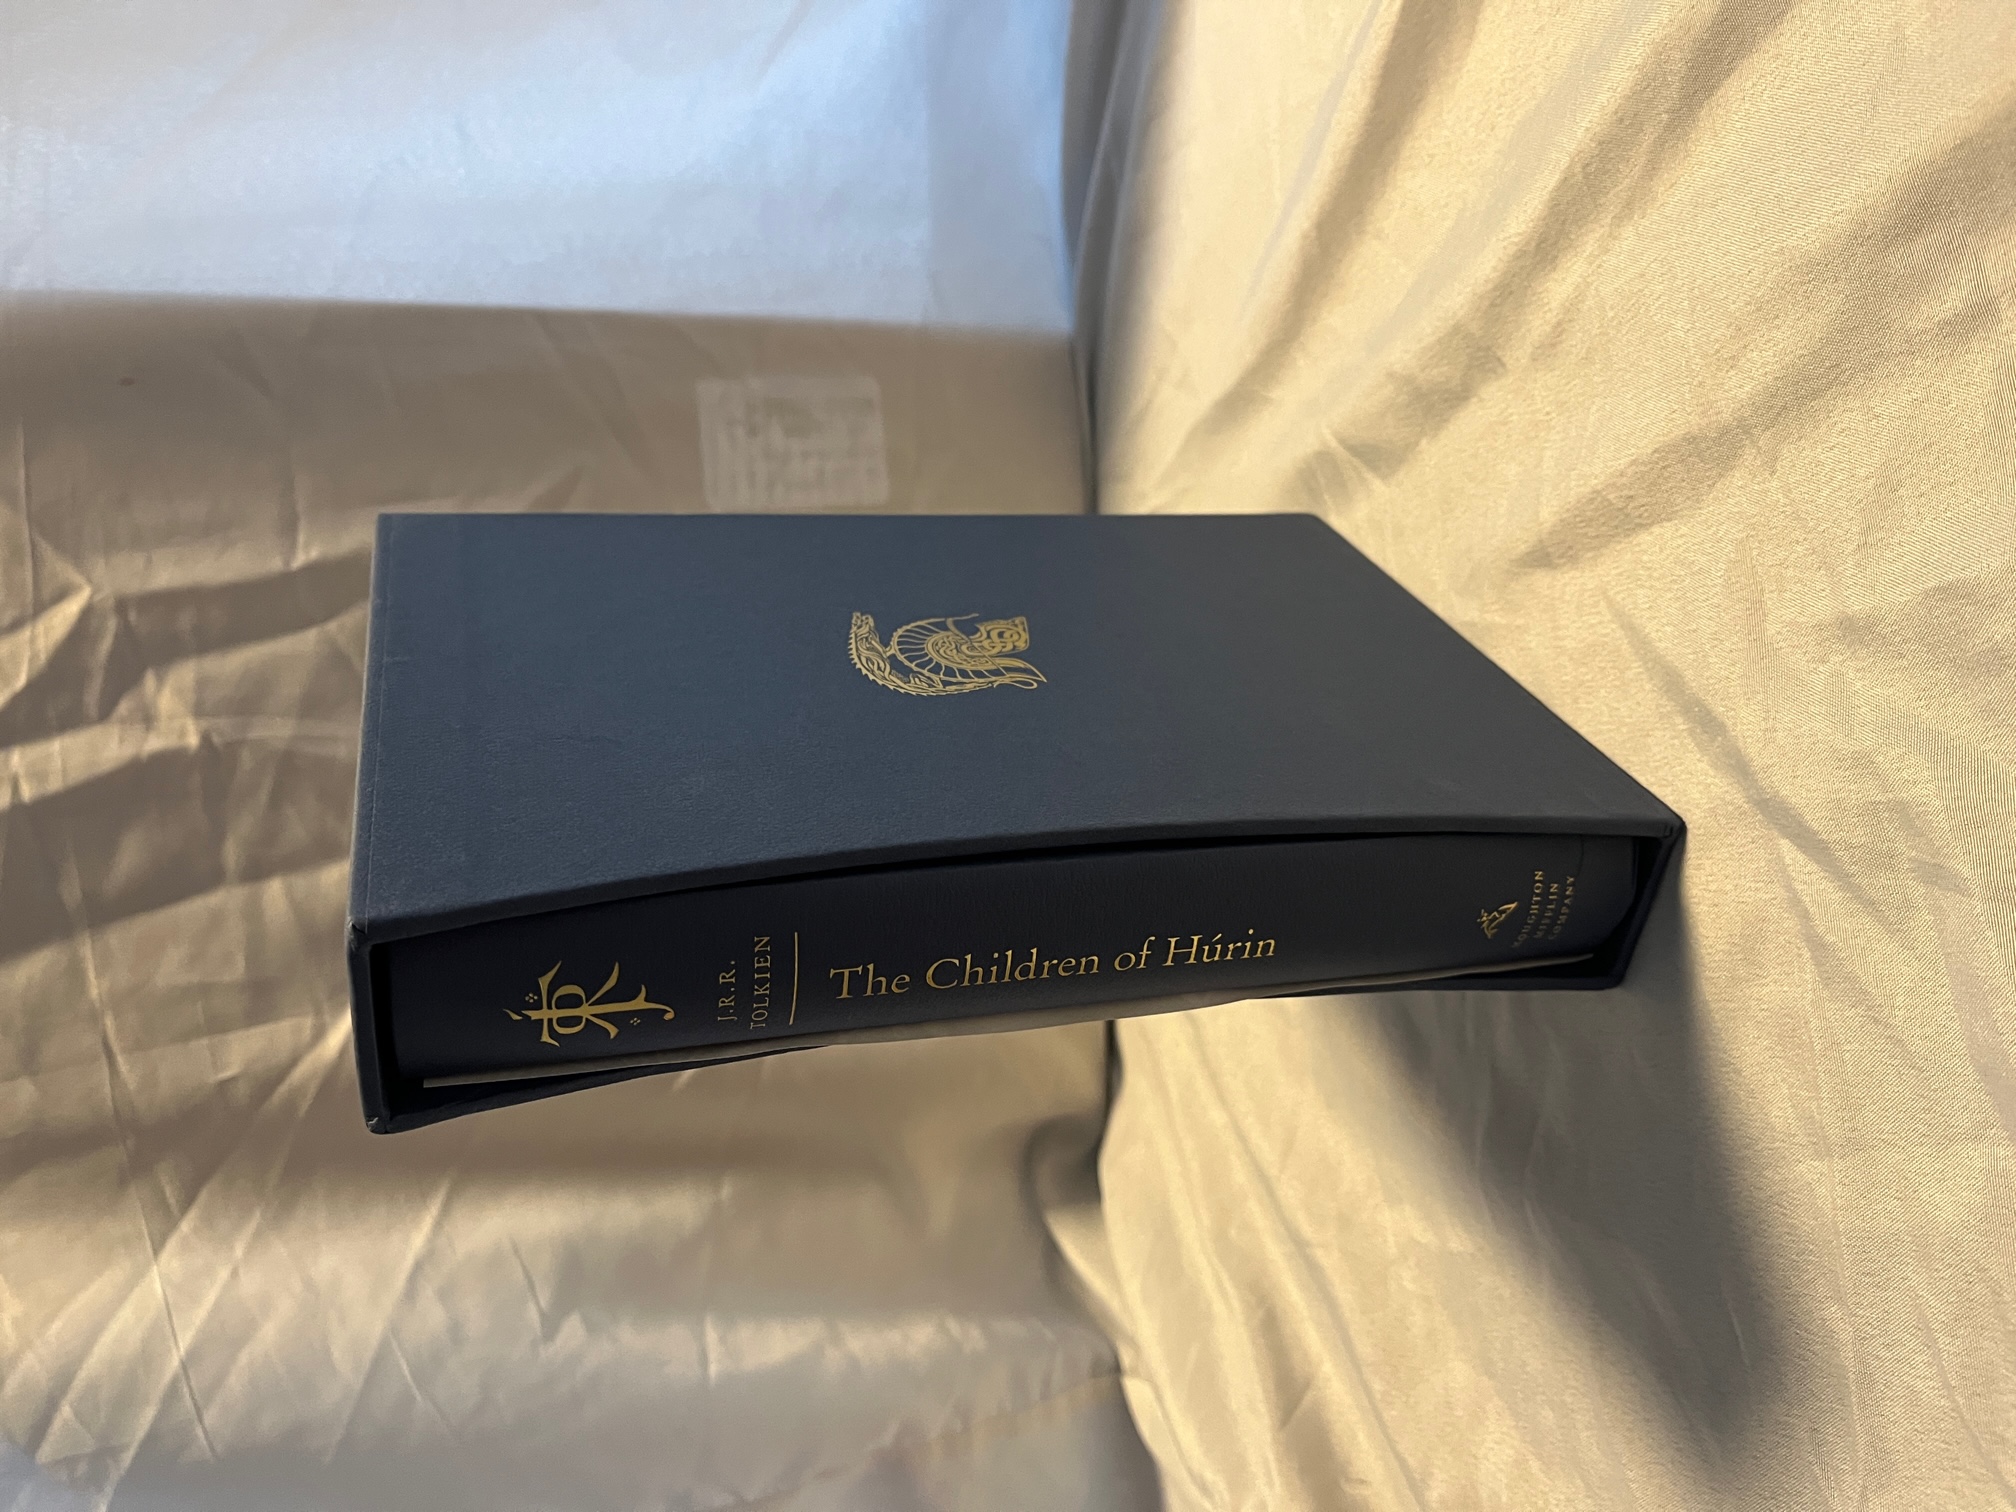 The Children of Hurin by J.R.R. Tolkien, US Deluxe Edition by Houghton Mifflin - Like New 1